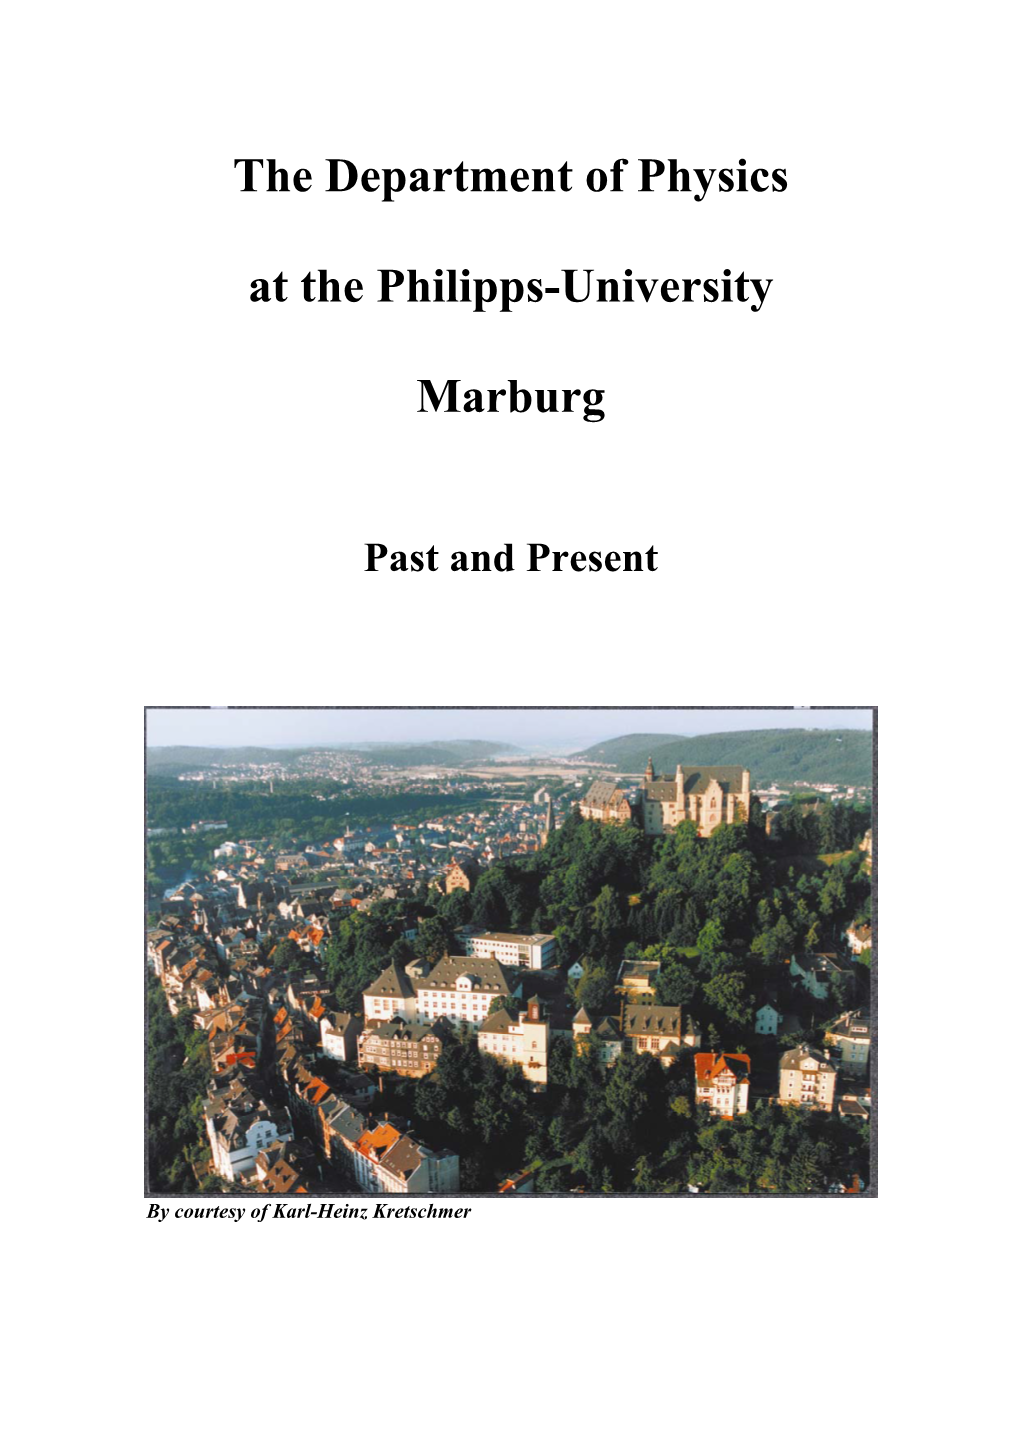 The Department of Physics at the Philipps-University Marburg